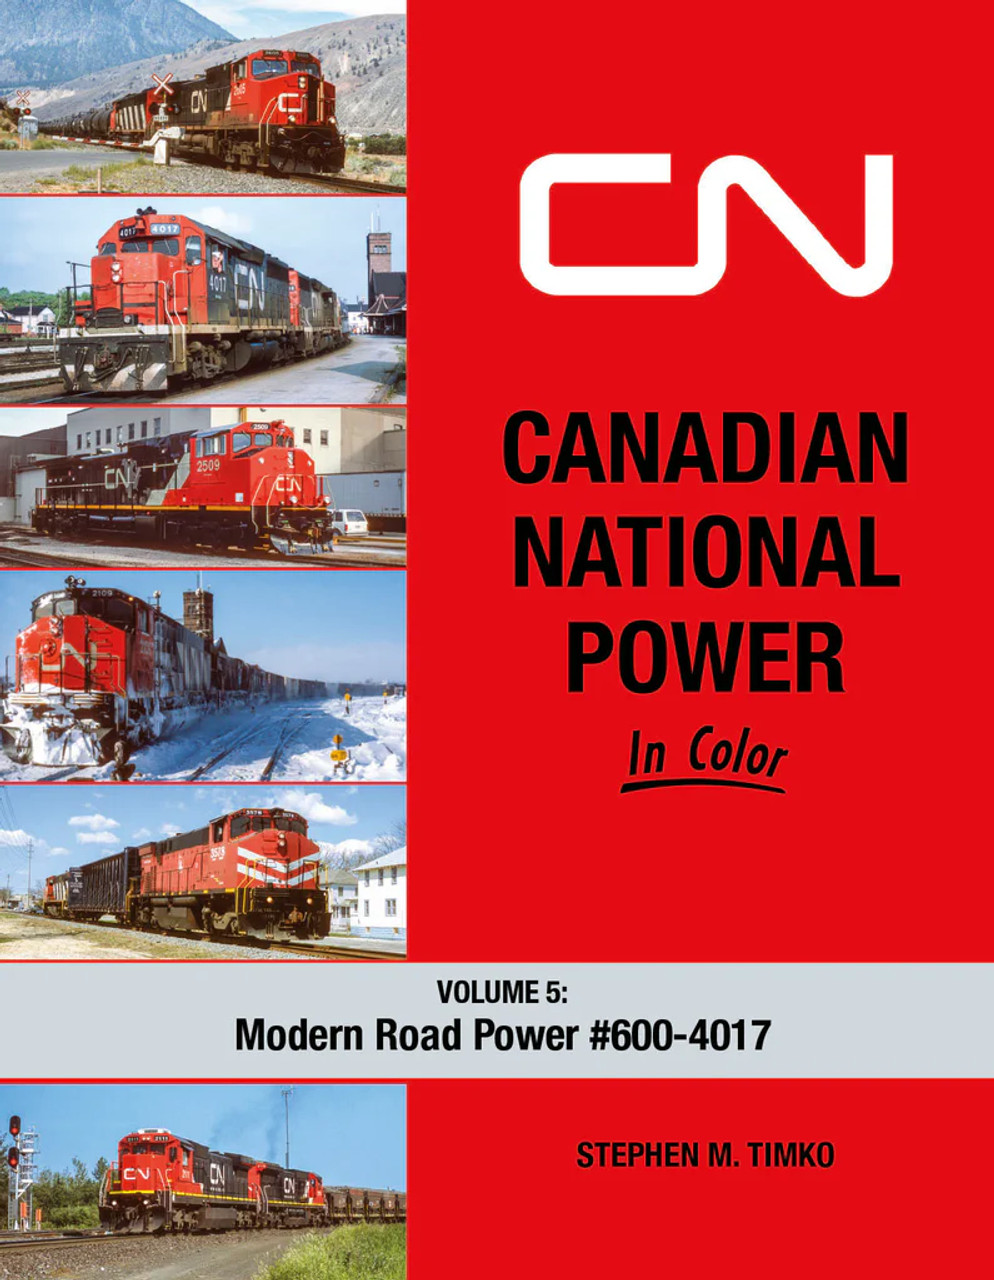 Morning Sun 1760 Canadian National Power In Color Volume 5: Modern Road Power #600-4017